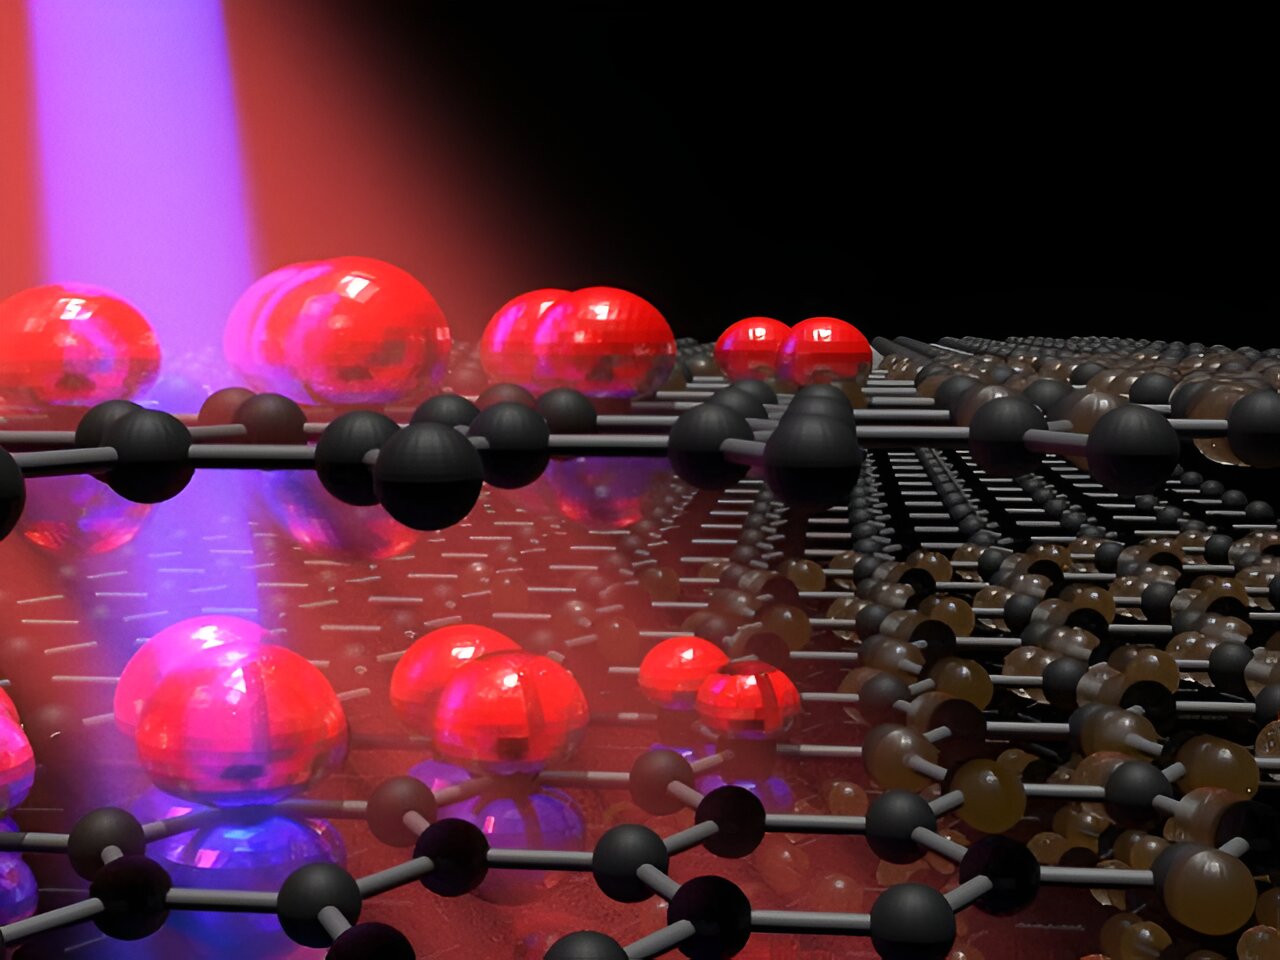 Attoscience Reveals a Light-Matter Hybrid Phase in Graphite Resembling Superconductivity